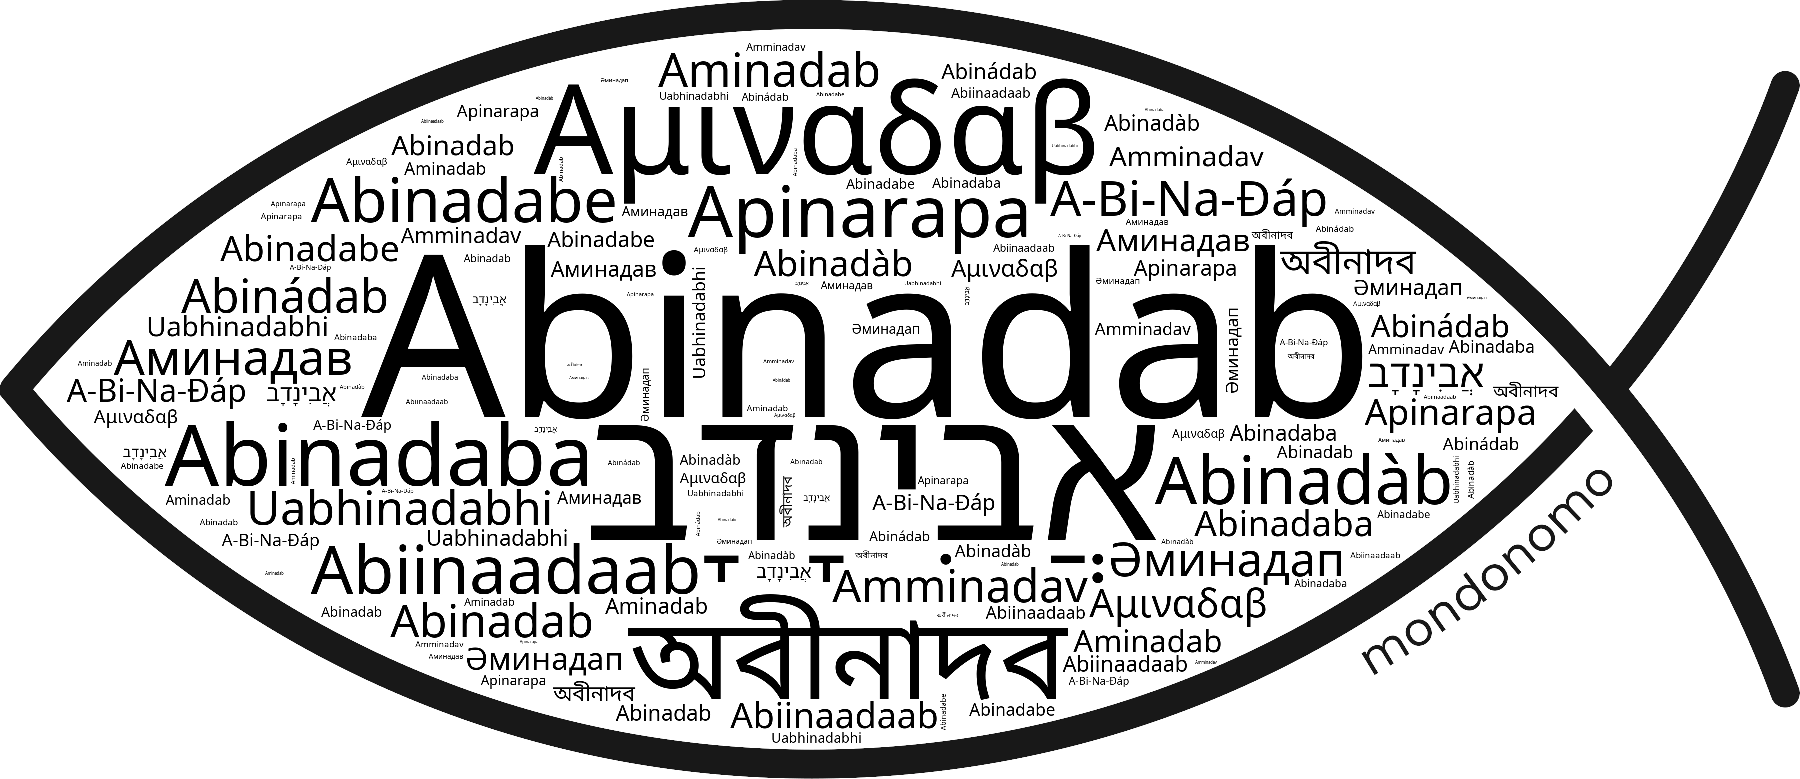 Name Abinadab in the world's Bibles